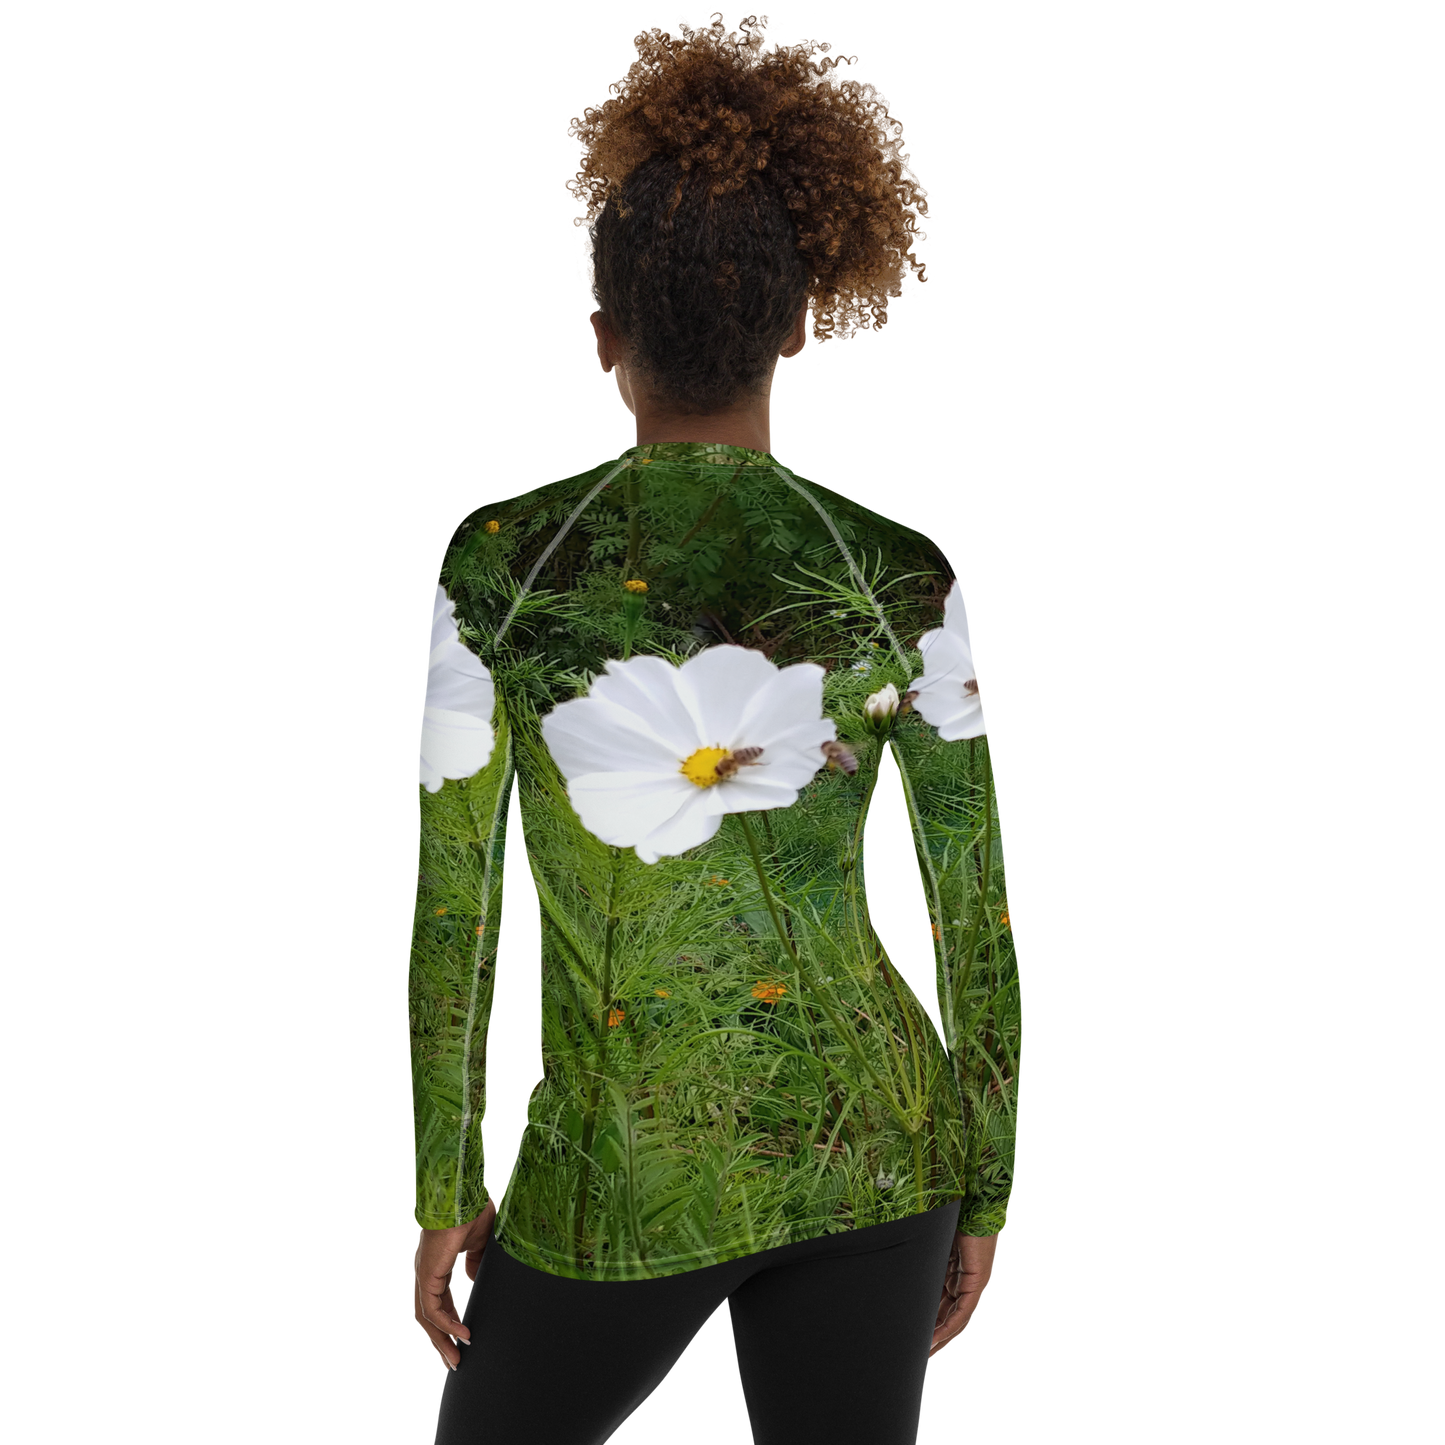 The FLOWER LOVE Collection - "Captivating Cosmos" Design Luxurious Women's Rash Guard, Sun Protective Clothing, Sports & Fitness Clothing